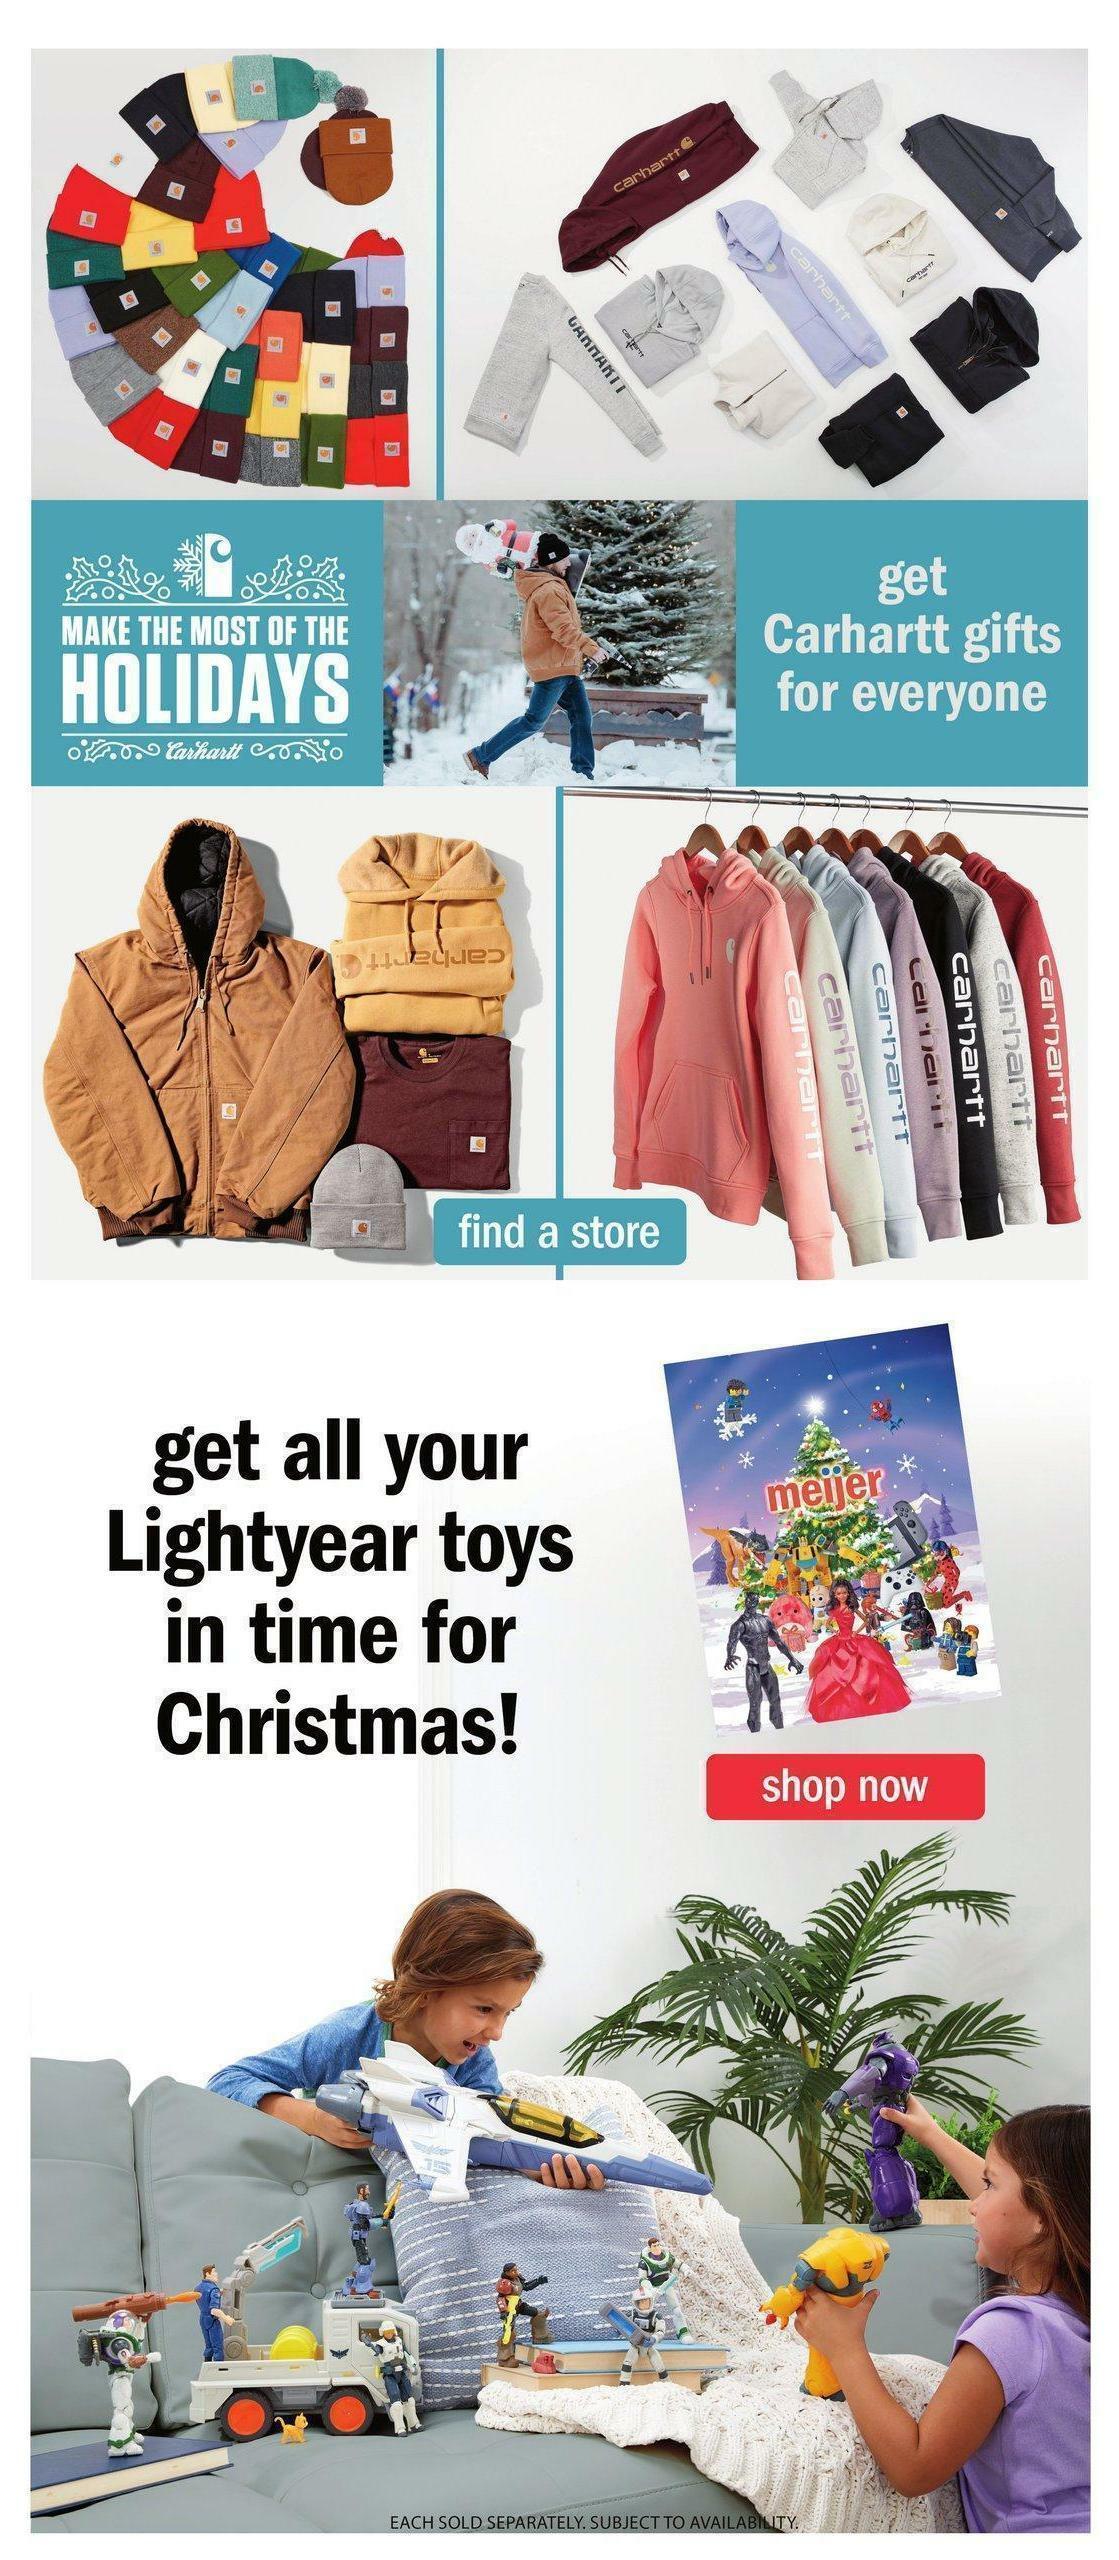 Meijer Weekly Ad from December 18